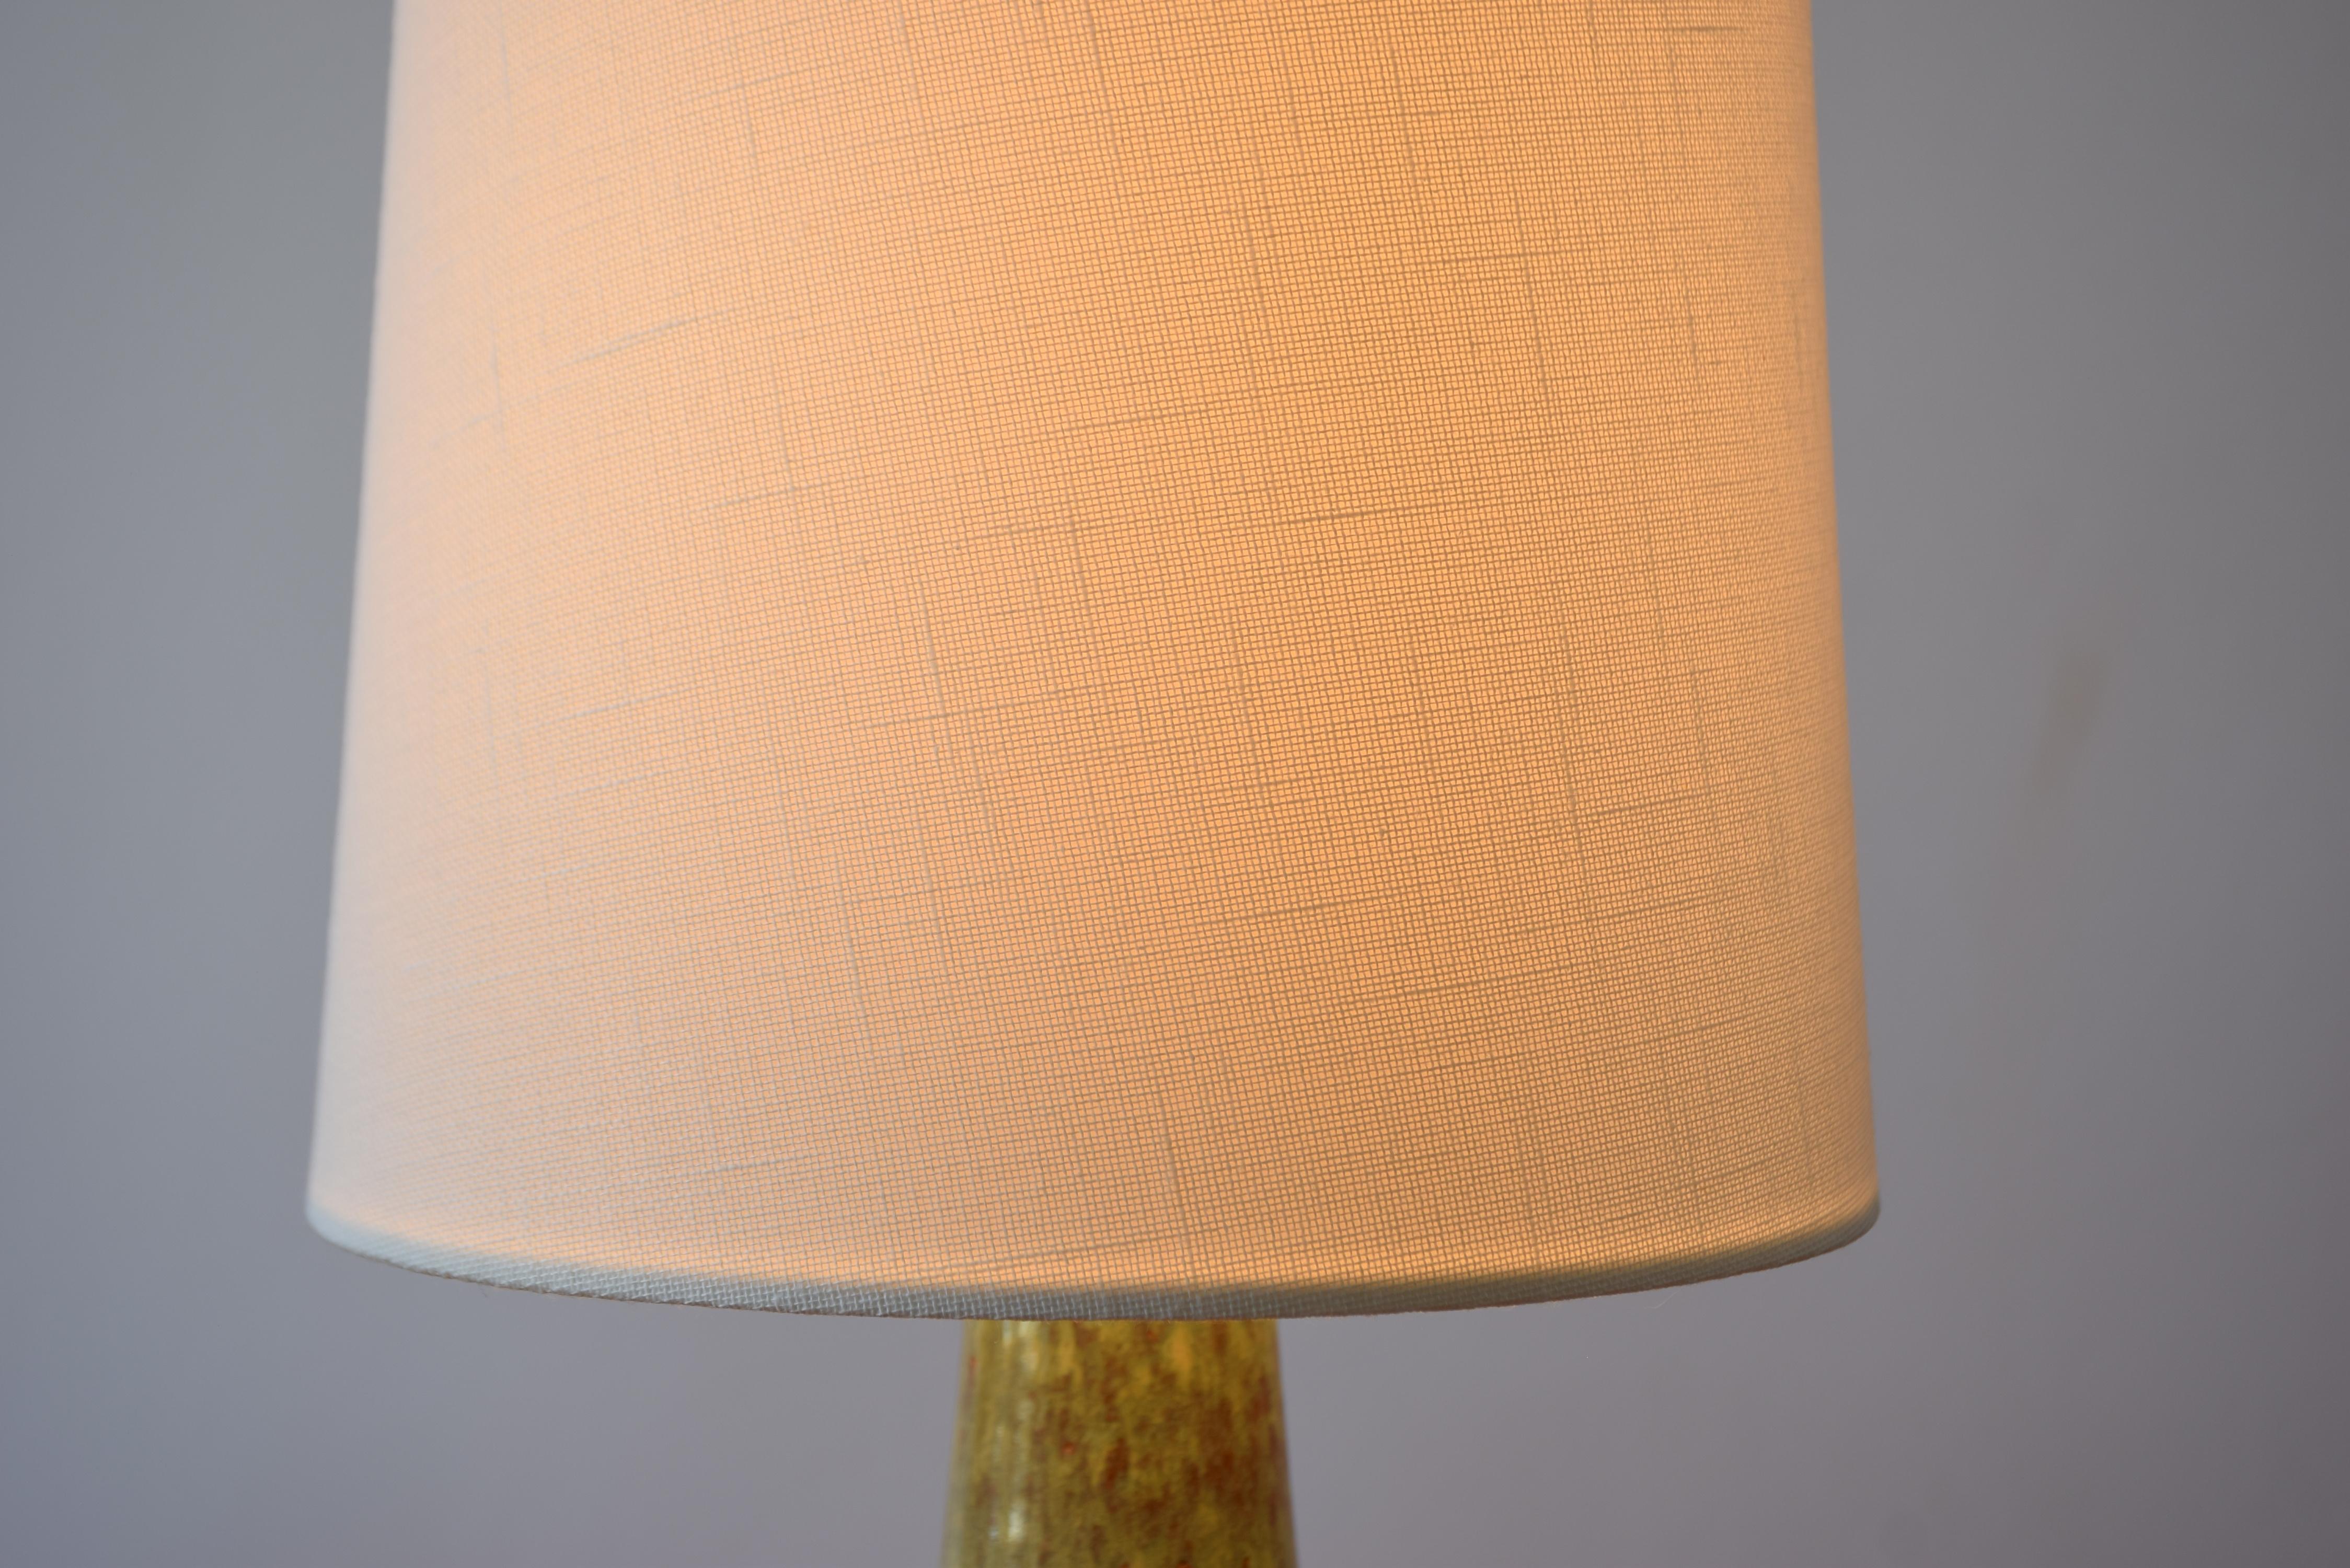 Søholm Small Ceramic Table Lamp with Brown and Green Glaze, Danish Modern 1960s For Sale 2